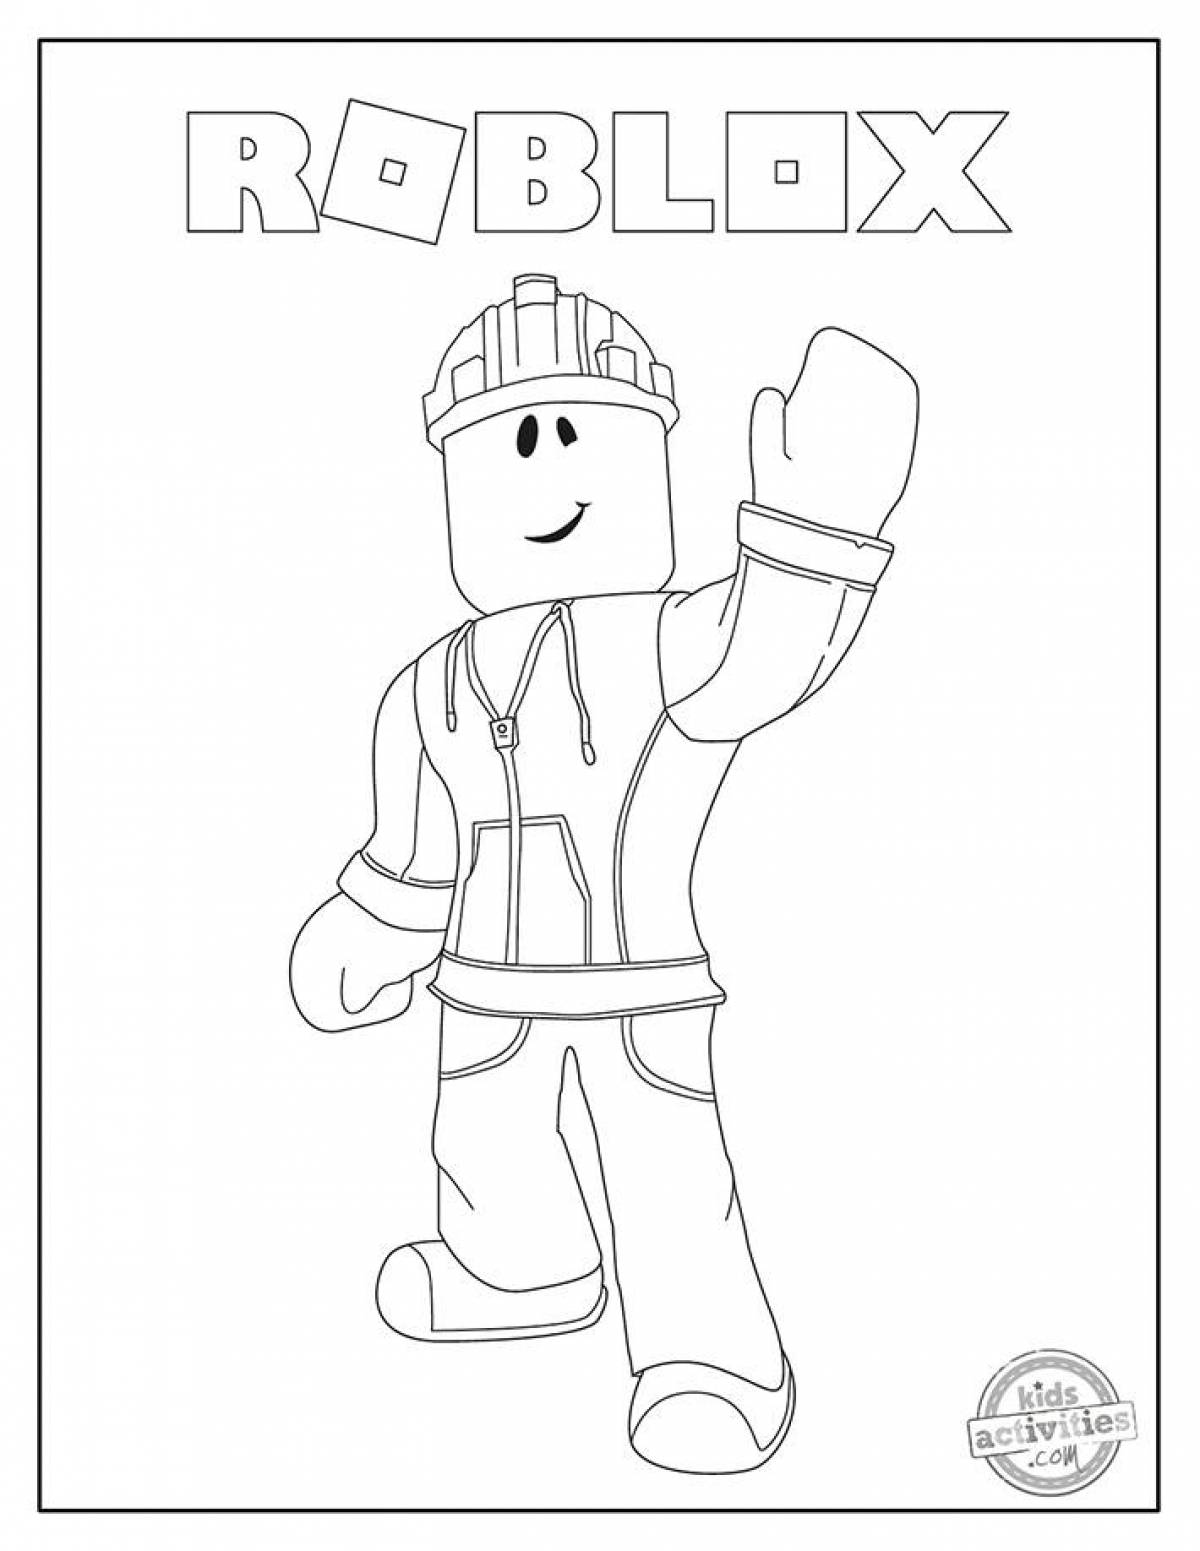 Colorful roblox coloring book for girls